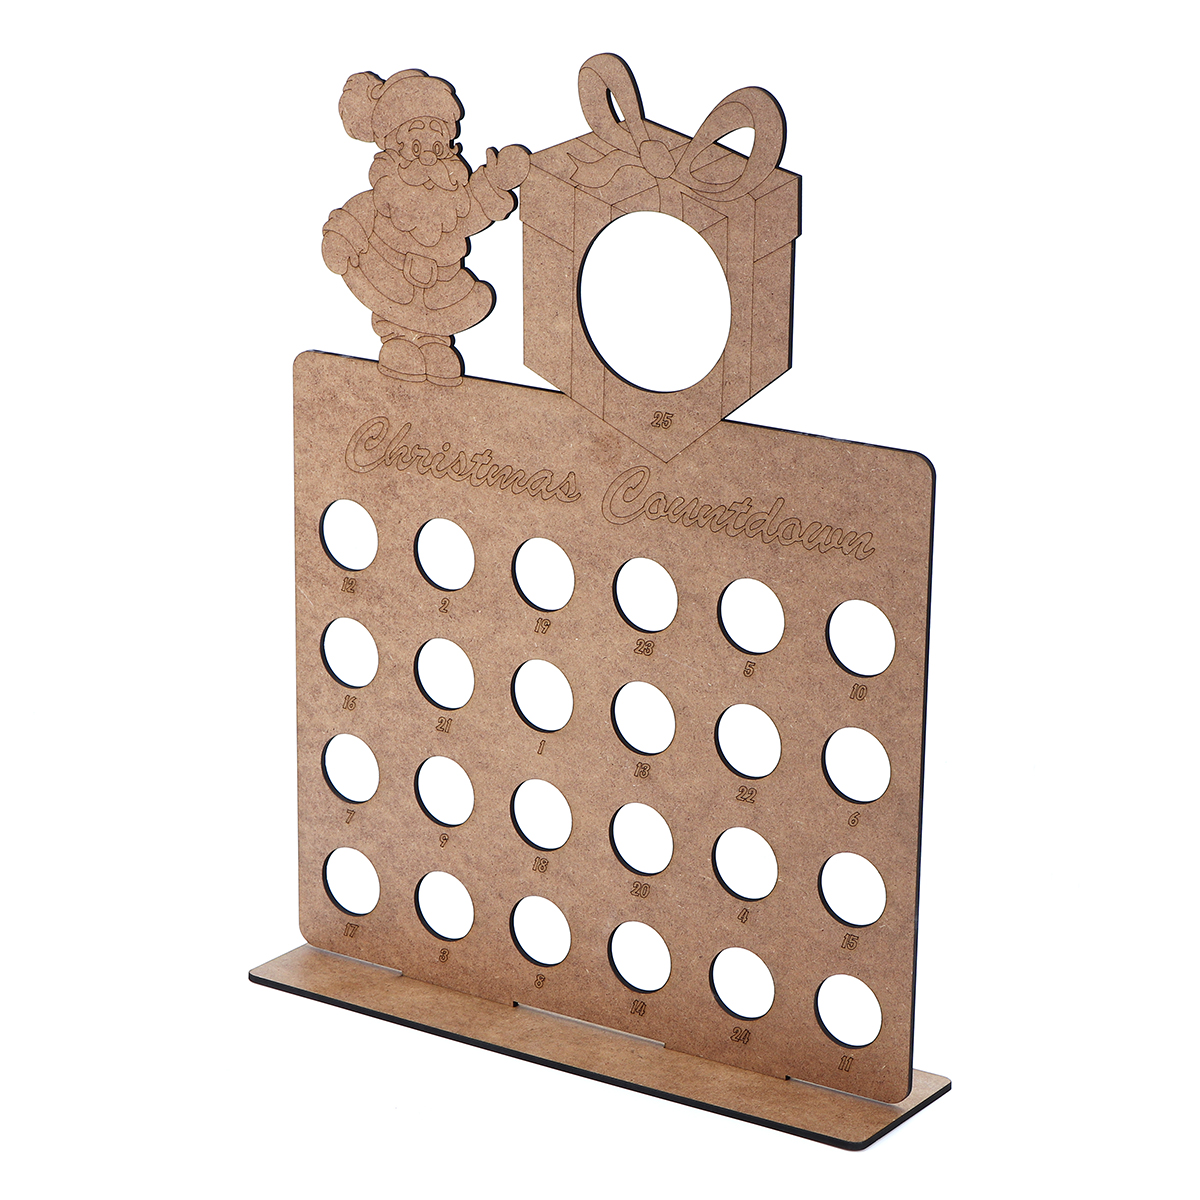 Wooden-Advent-Calendar-Christmas-Tree-24-Chocolates-Stand-Rack-Home-Decorations-1458956-6